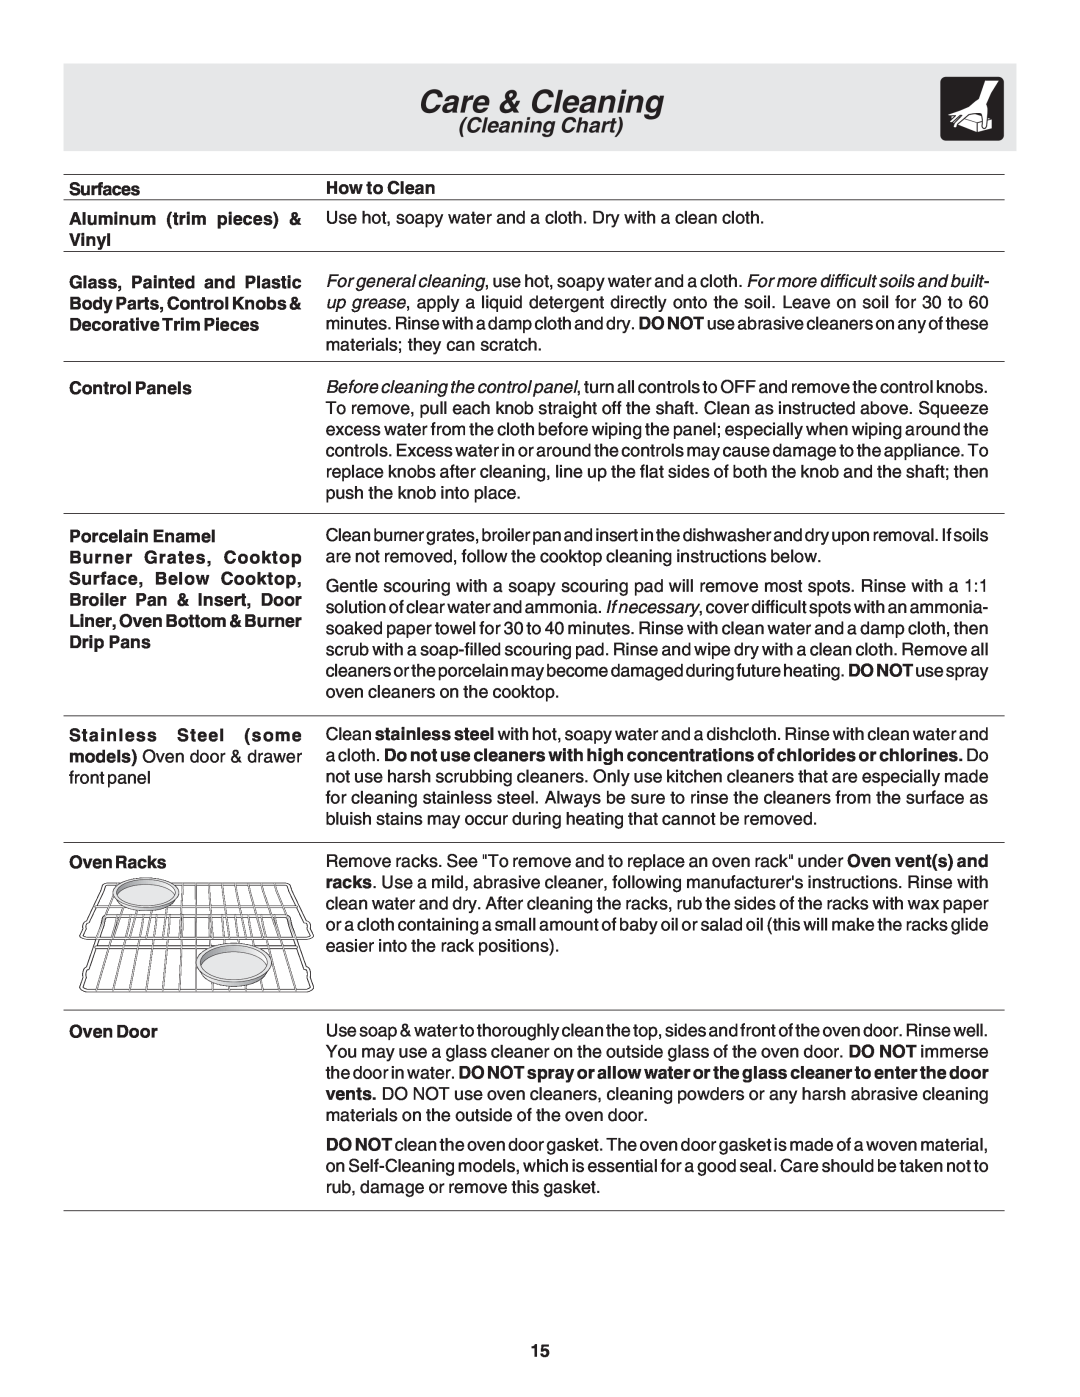 Frigidaire 318200880 Care & Cleaning, Cleaning Chart, Surfaces, How to Clean, Vinyl, Decorative Trim Pieces, Oven Racks 